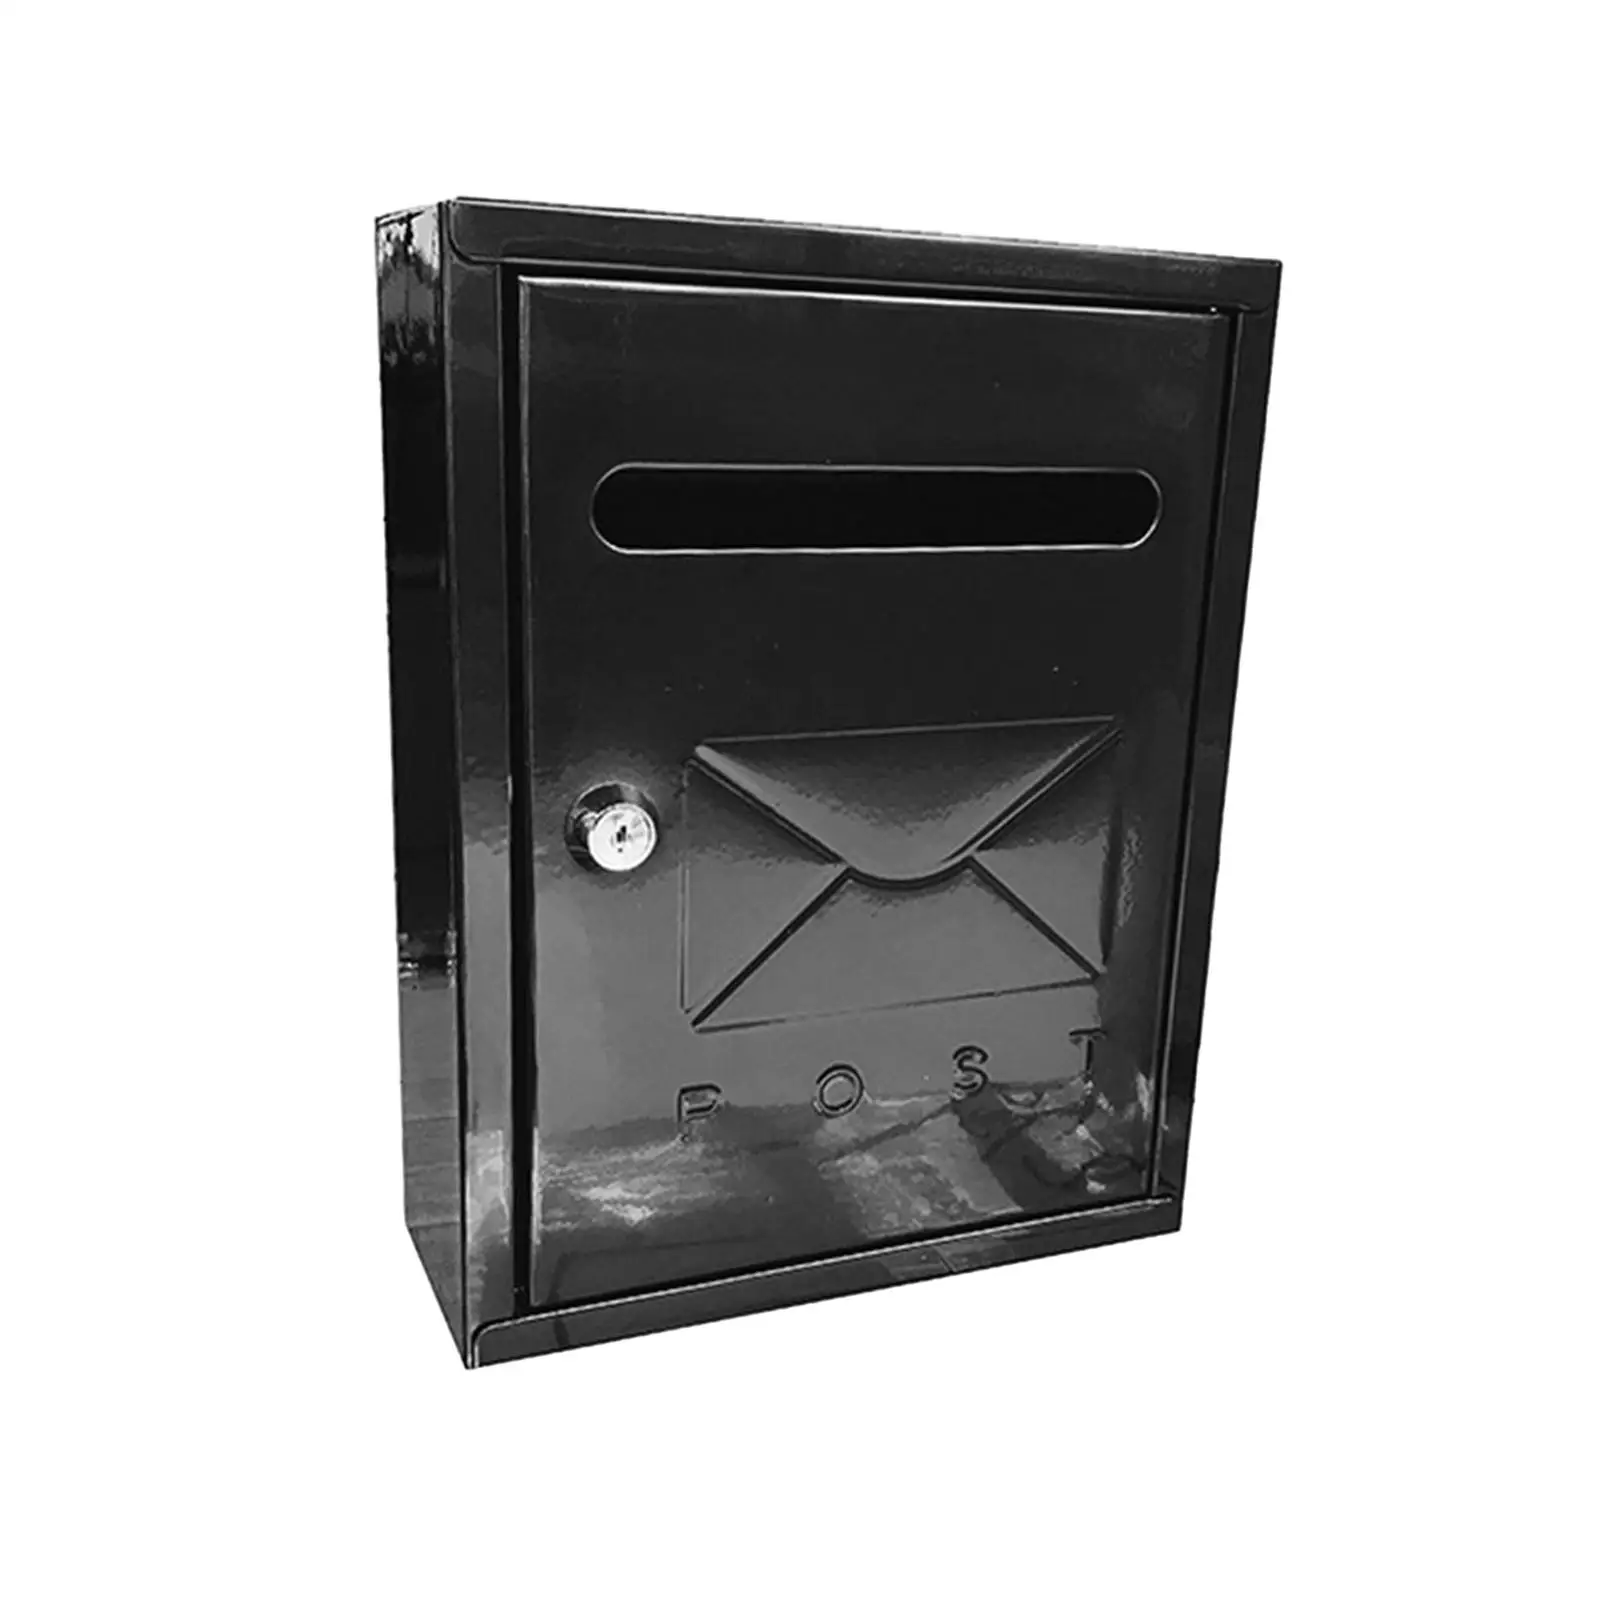 Locking Wall Mailbox Outdoor Mail Box Multifunctional Rust Resistant 21.7x30x7cm for Commercial Rural Home Scratch Resistant